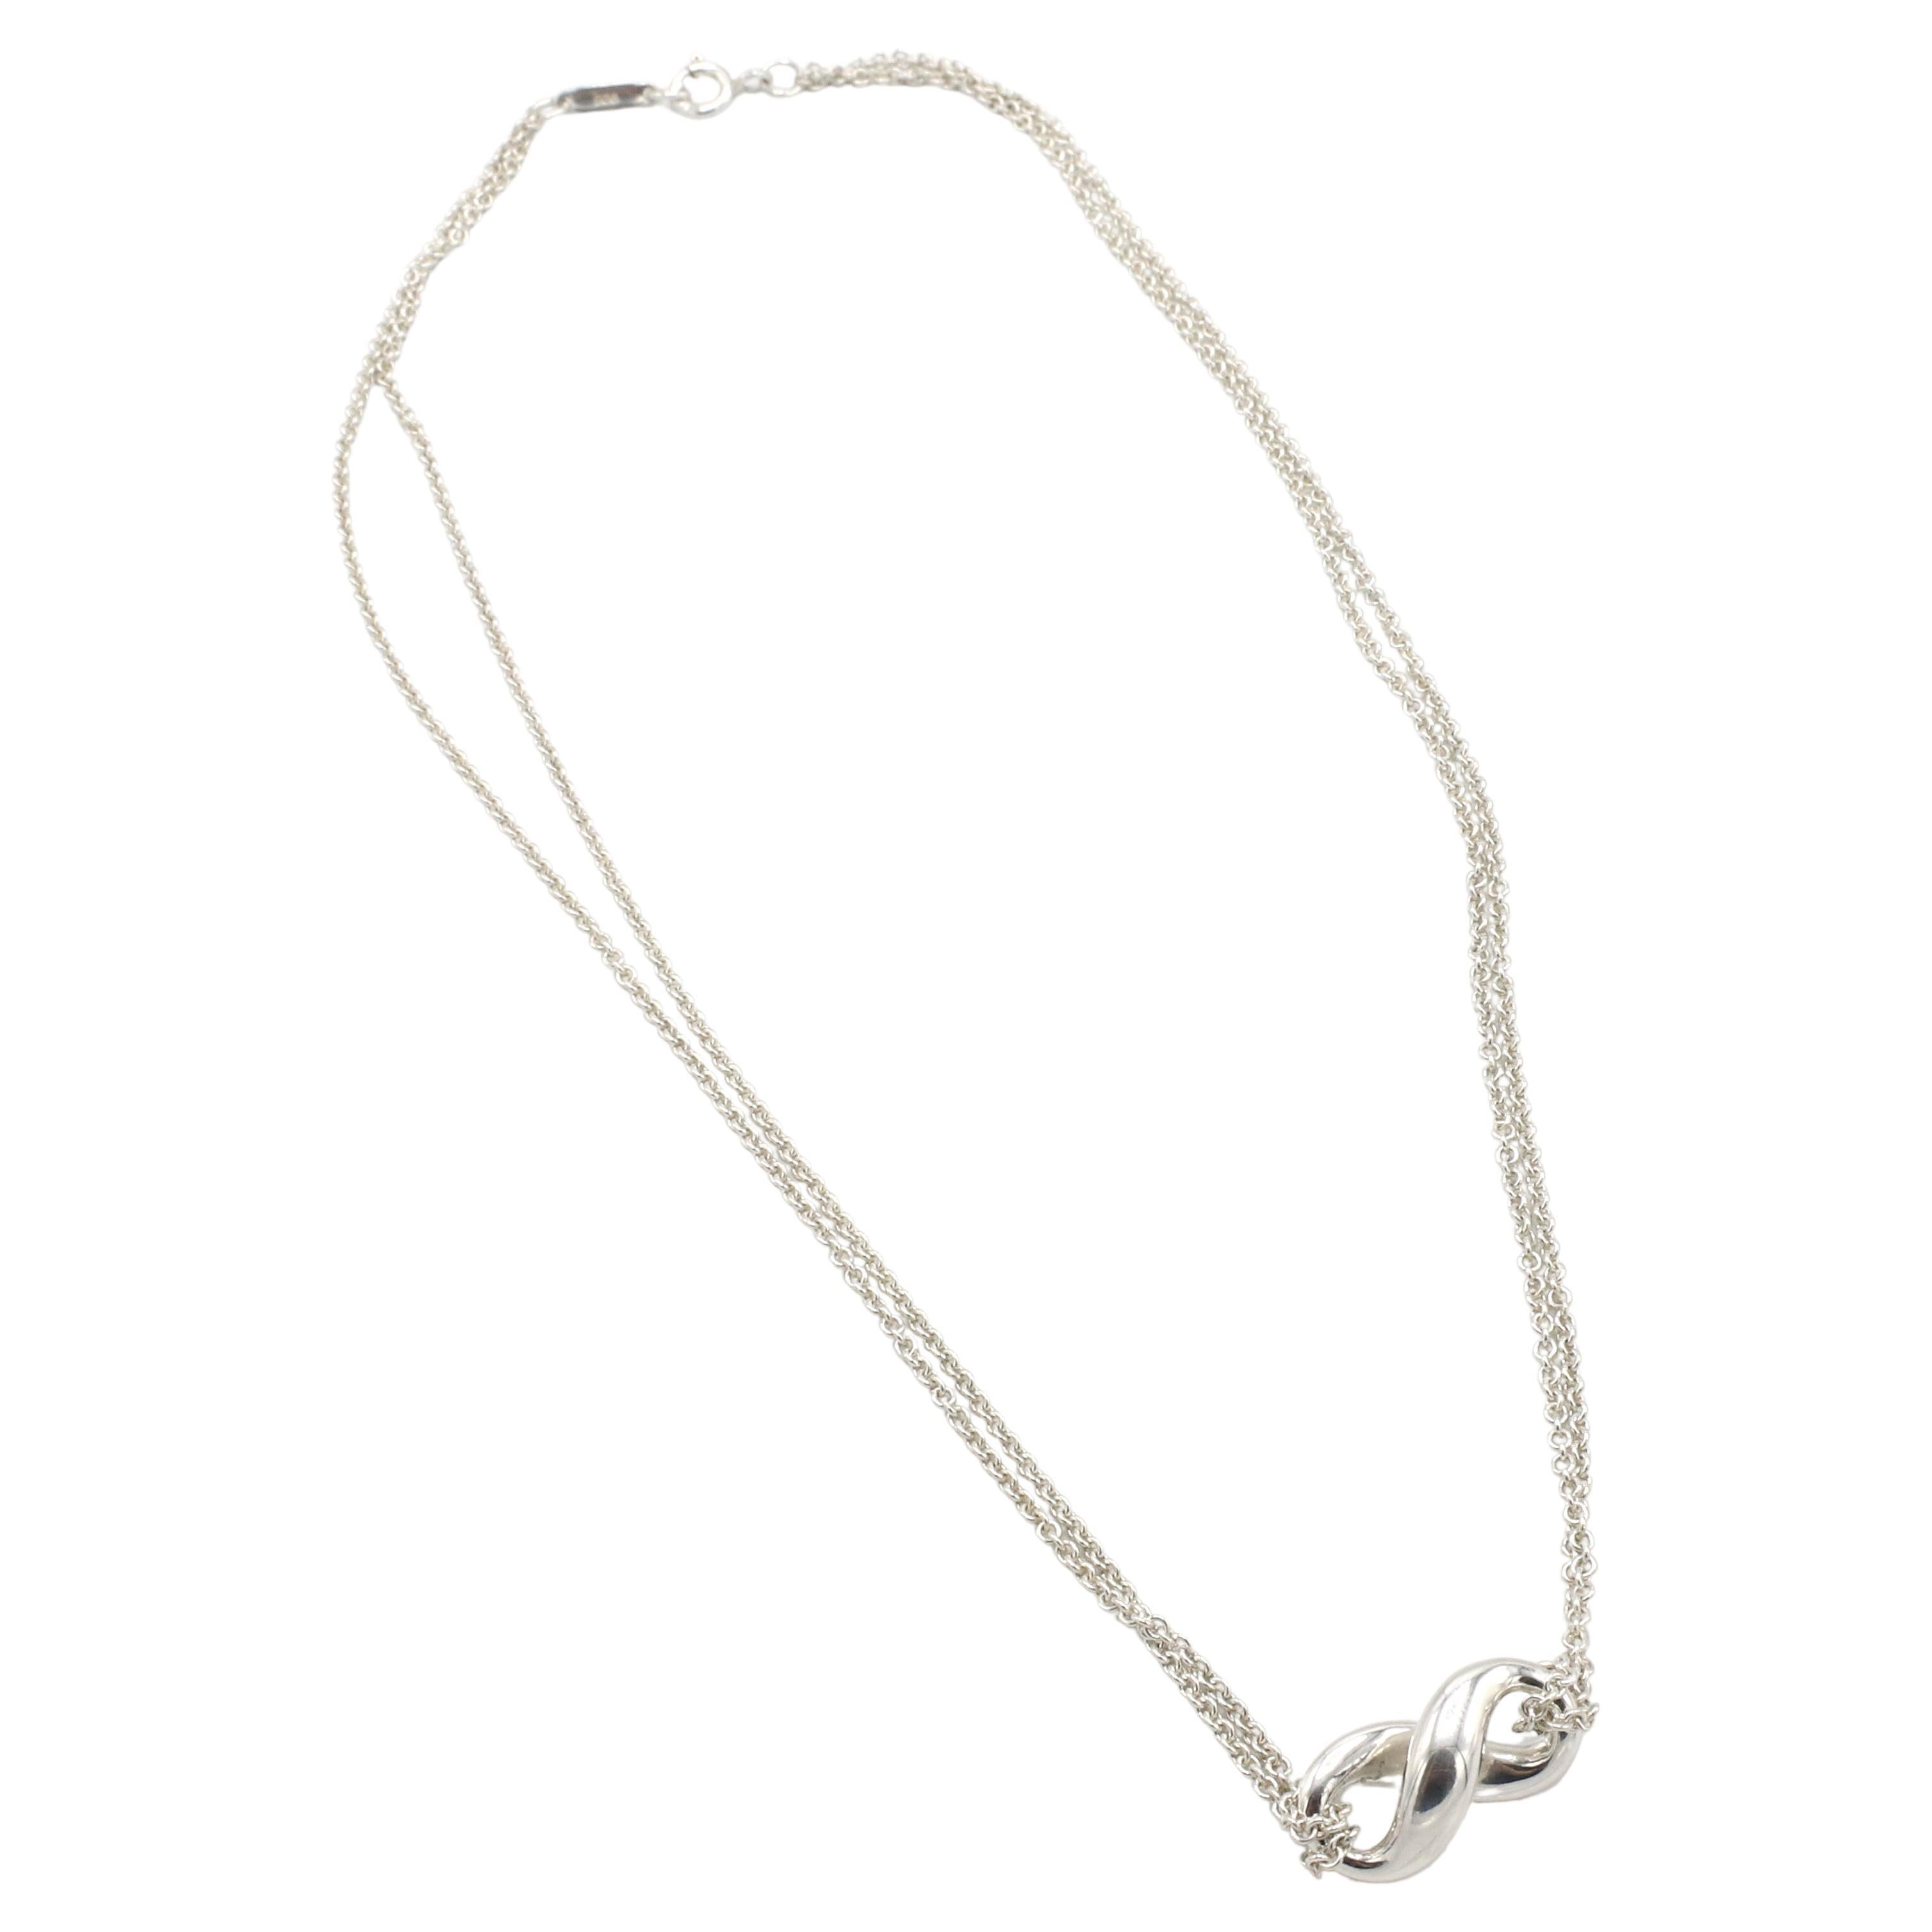 Tiffany & Co. Sterling Silver Infinity Double Chain Pendant Necklace
Metal: Sterling silver 925
Weight: 7.44 grams
Length: 16 inches
Pendant: 20mm
Signed: ©Tiffany & Co. 925 